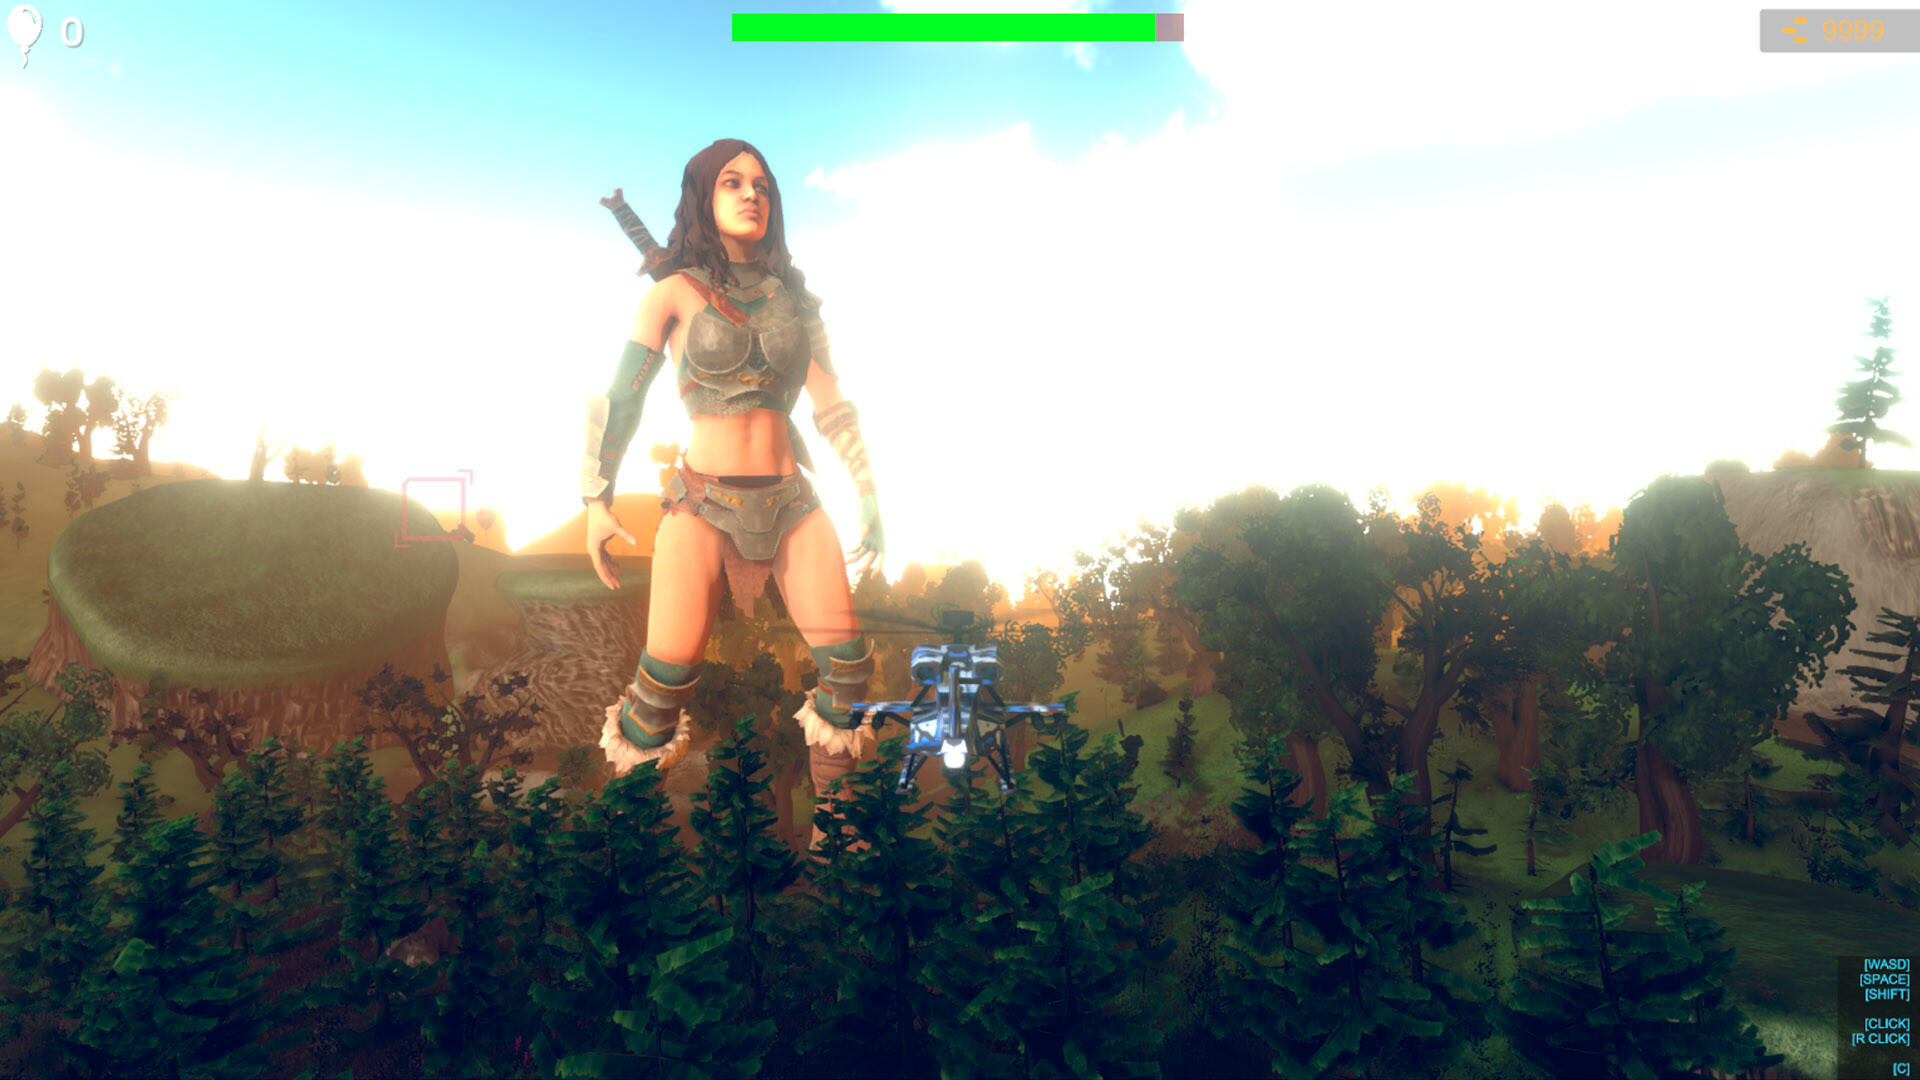 Screenshot 1 of Save Giant Girl from monsters 2 